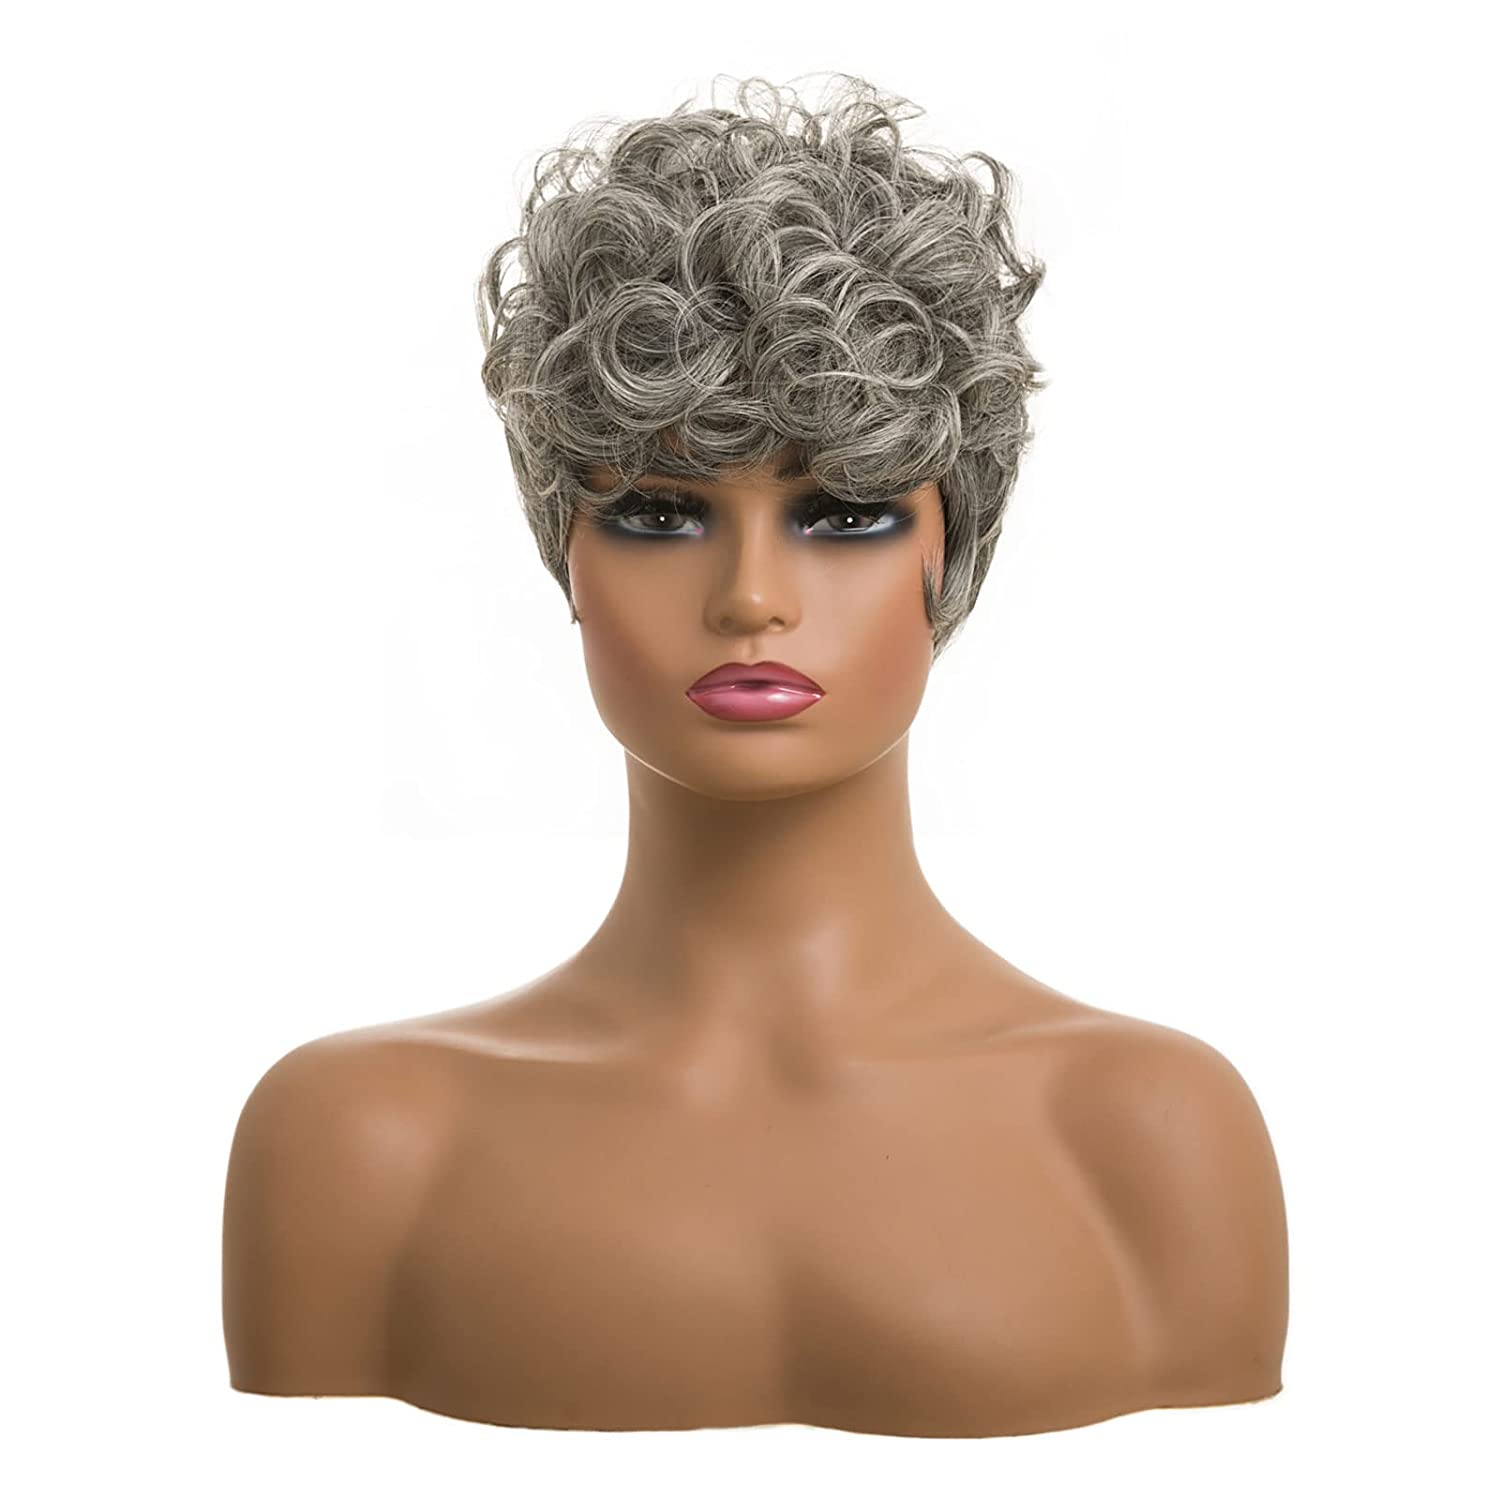 Shop Short Pixie Color Curly-Black Mixed Silver Synthetic Wig Hair Replacement Short Pixie Cut Wig for Black Women Pixie Cut Wig with Bangs Short Curly Wigs for Black Women Natural Wavy Layered Pixie Wig for African... Color :  different hair replacement system products including men’s toupees, women’s wigs, toppers and hair extensions,  wholesalers, including online shop owners, salon owners, hair stylists and regional wig and hair system distributors. feelmorelikeuhair.com